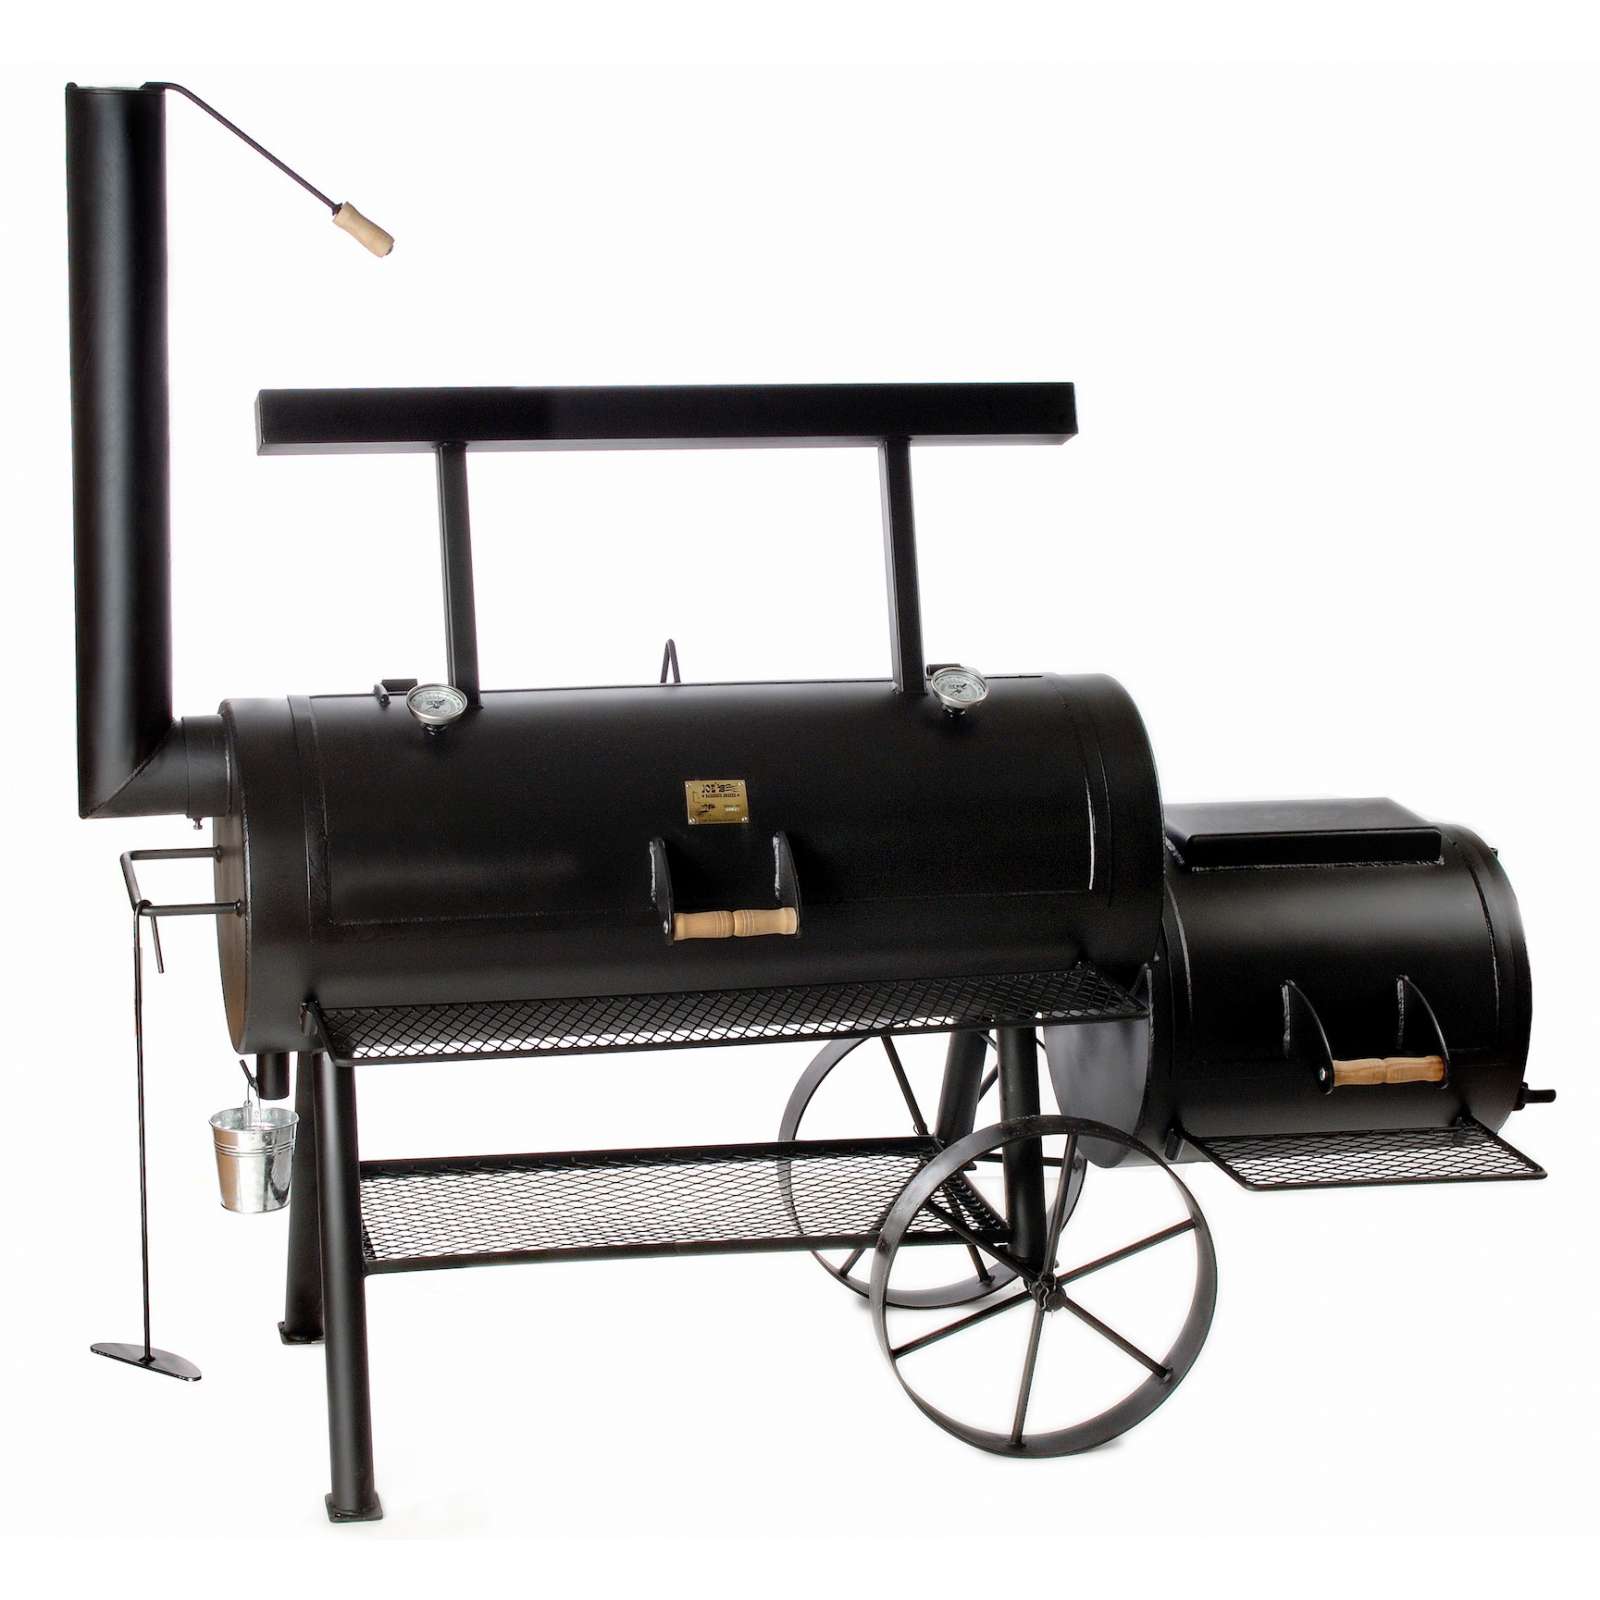 Rumo Barbeque JOEs Smoker Championship Longhorn 20 Zoll Holzkohlegrill JS-33955